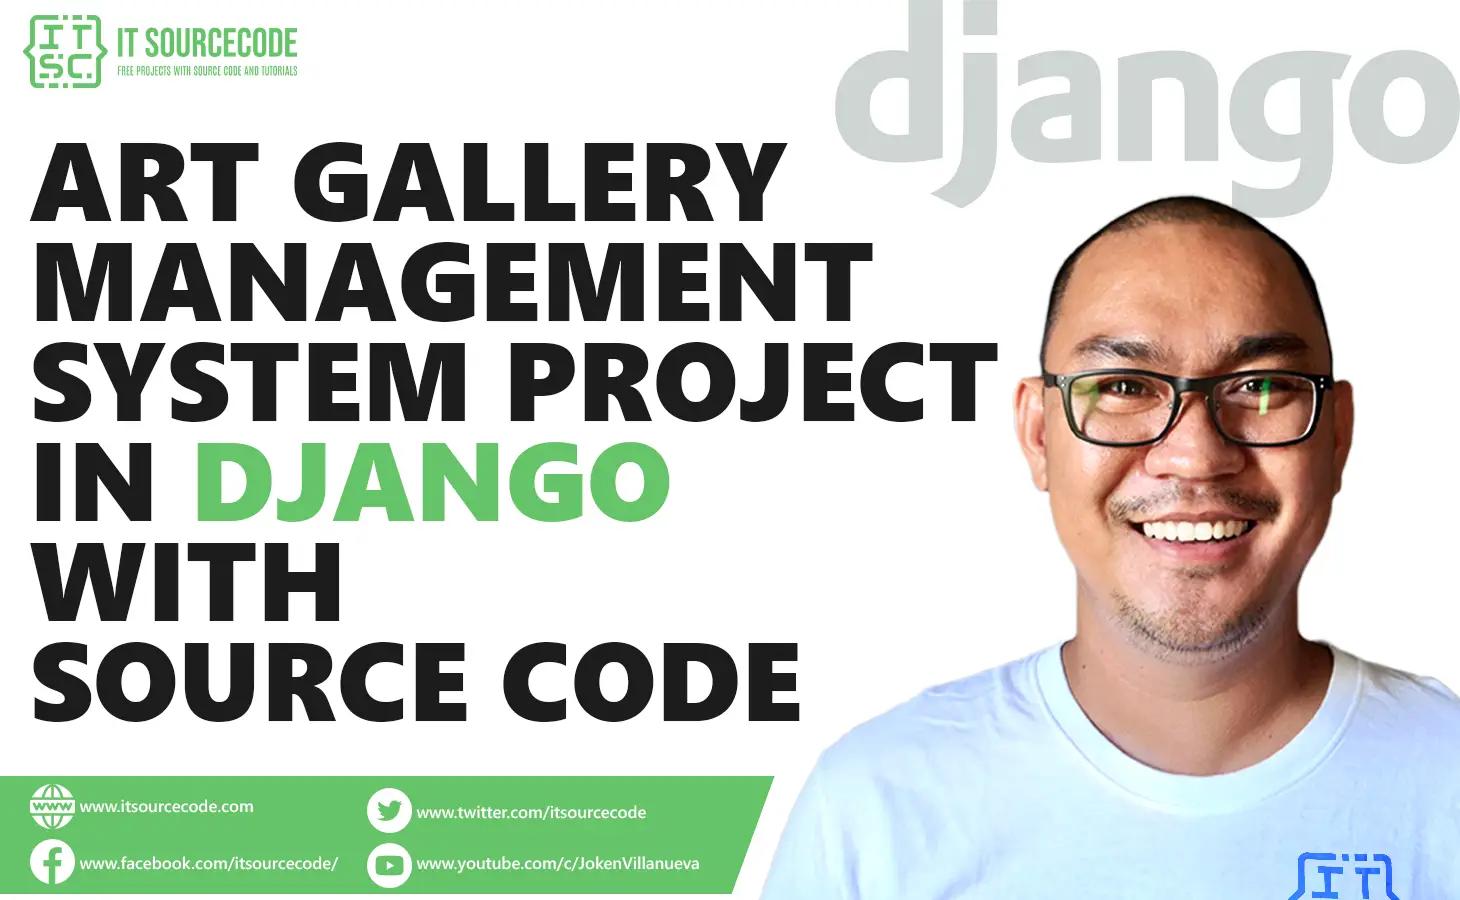 Art Gallery Management System Project in Django with Source Code